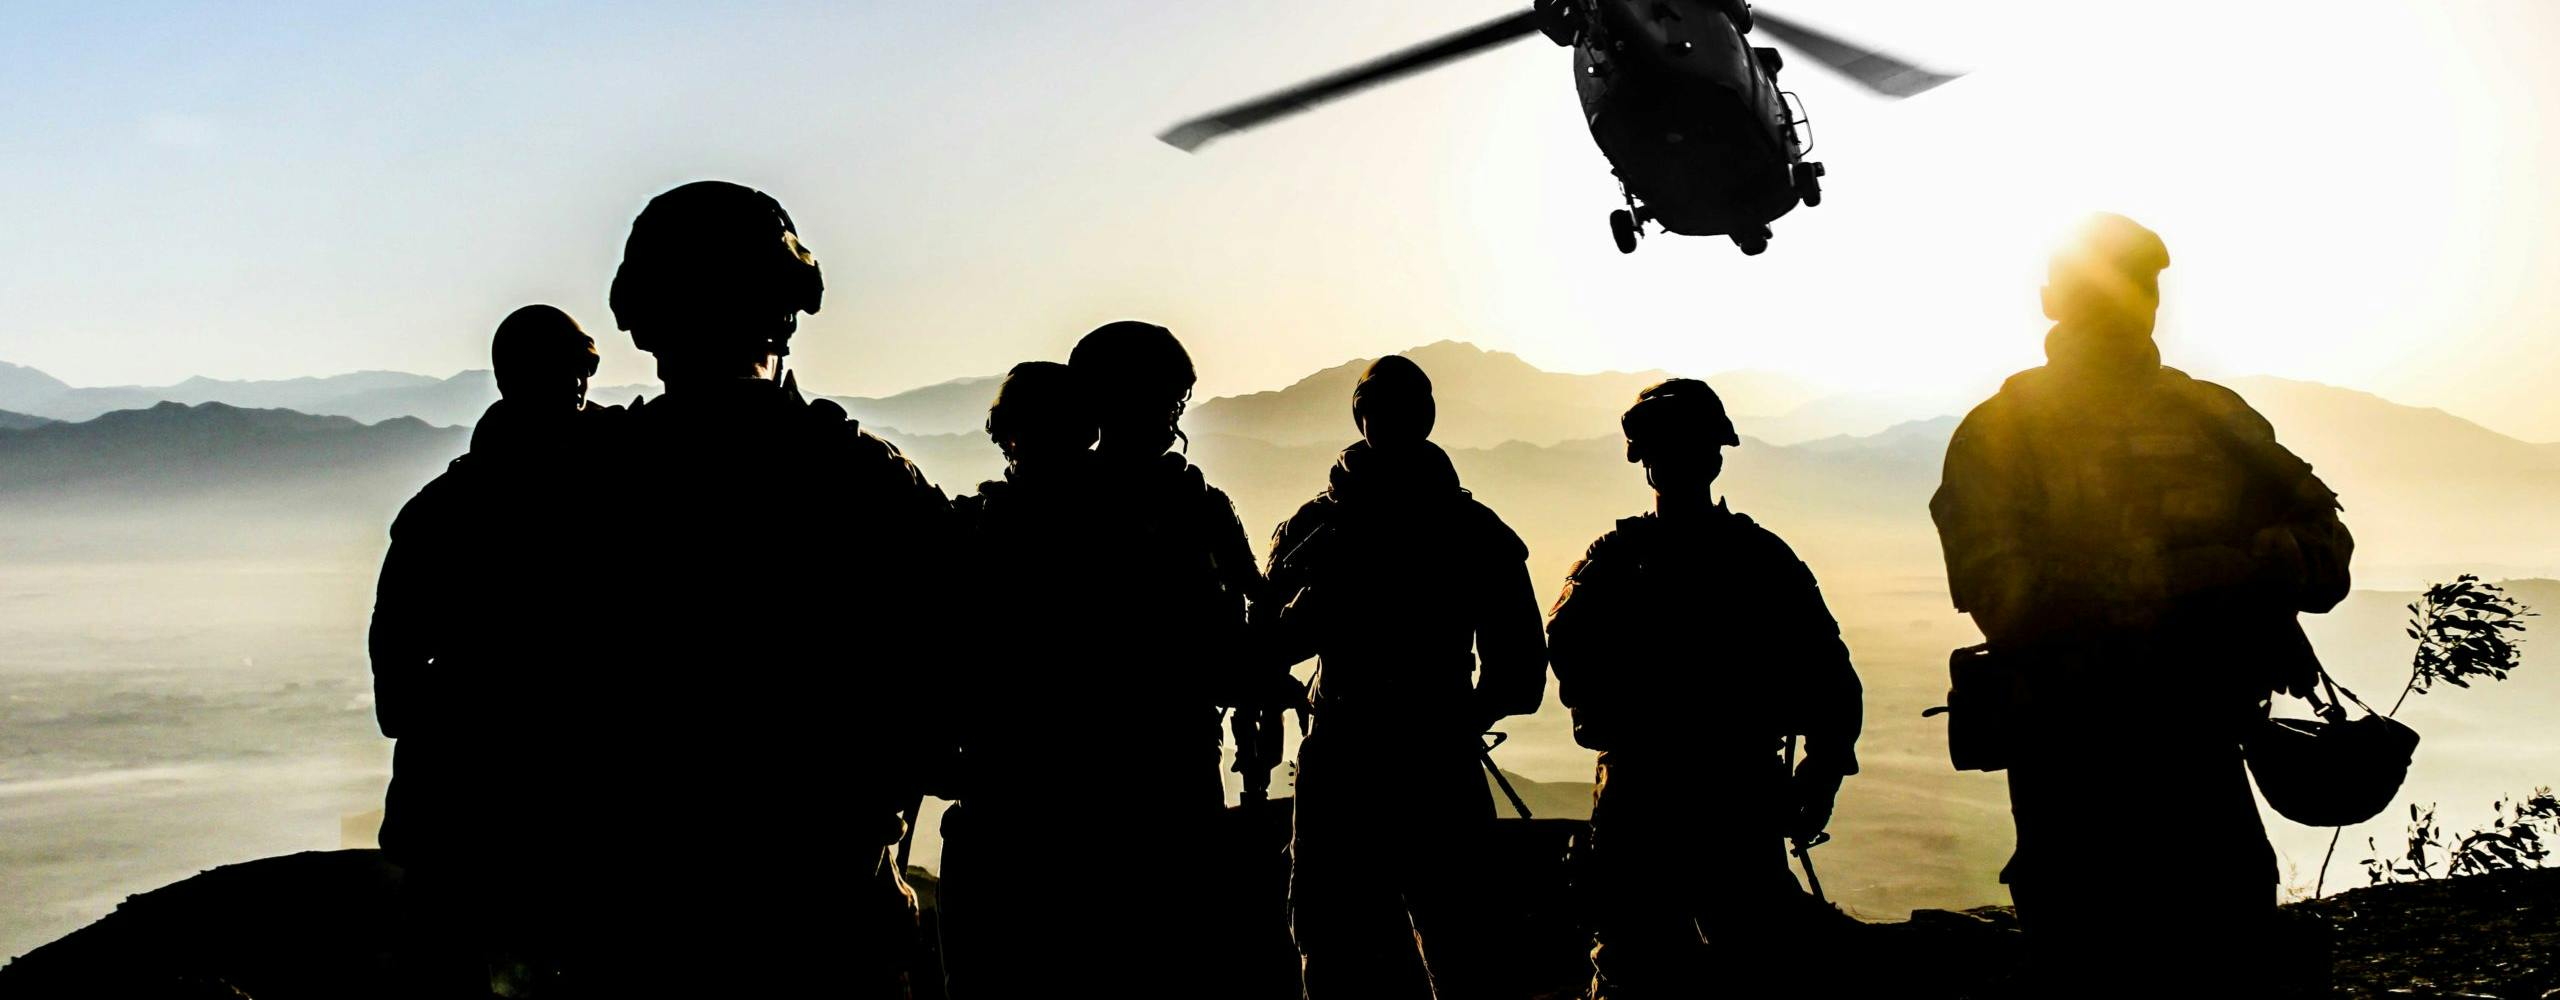 Image showing silhouettes of soldiers atop a mountain with the sun in the background and two helicopters flying in towards them. Related to: deployable communications kits, scalable communications kits, DOD compliance, warfighter communications kits, remote connectivity, deployed warfighters connectivity